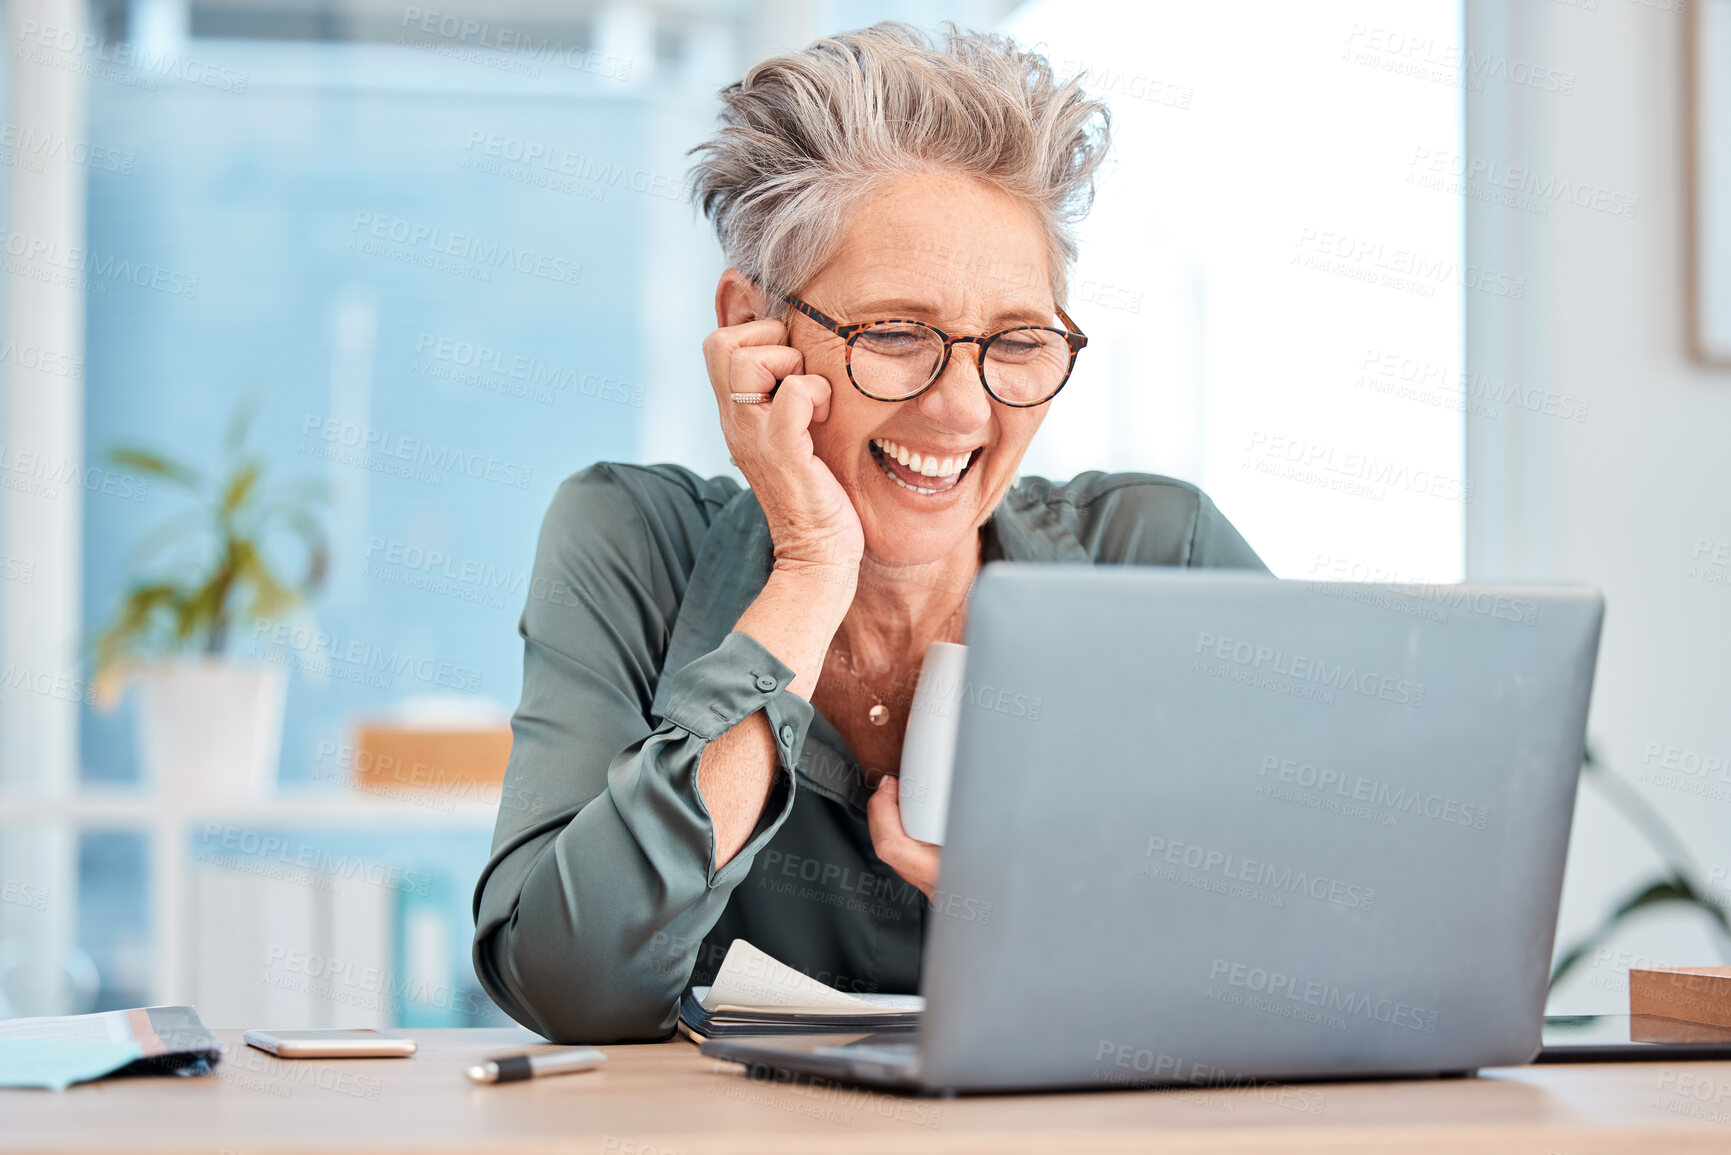 Buy stock photo Laptop, coffee and senior business woman laughing at an email in her office at work for fun or humor. Computer, tea and comic with a mature female employee working on a report or project and joking